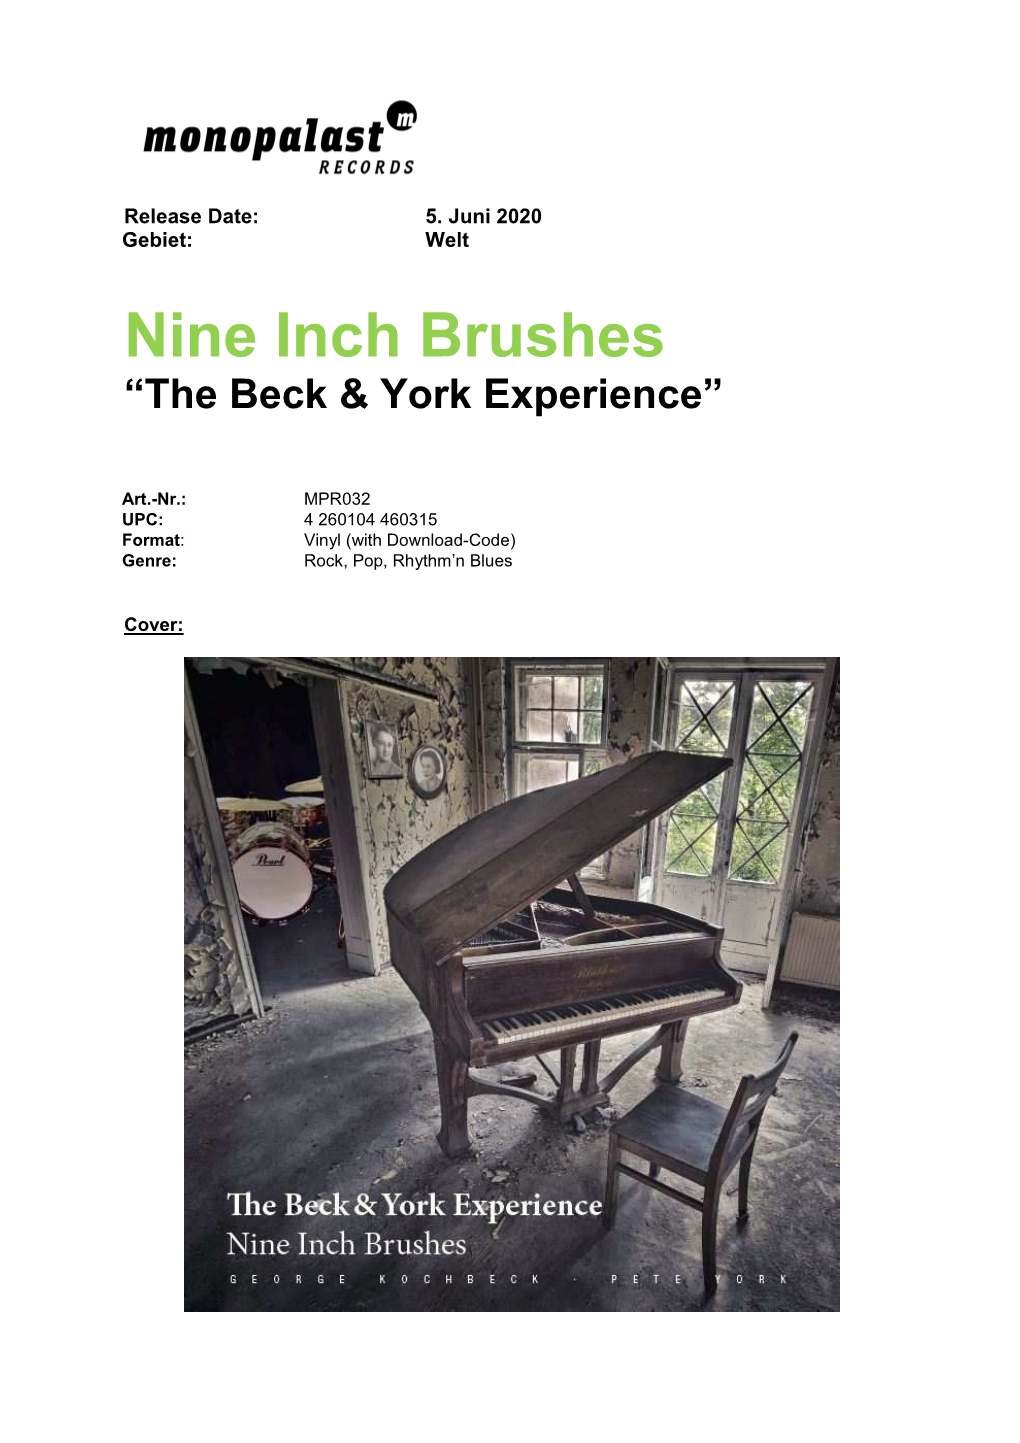 Nine Inch Brushes “The Beck & York Experience”